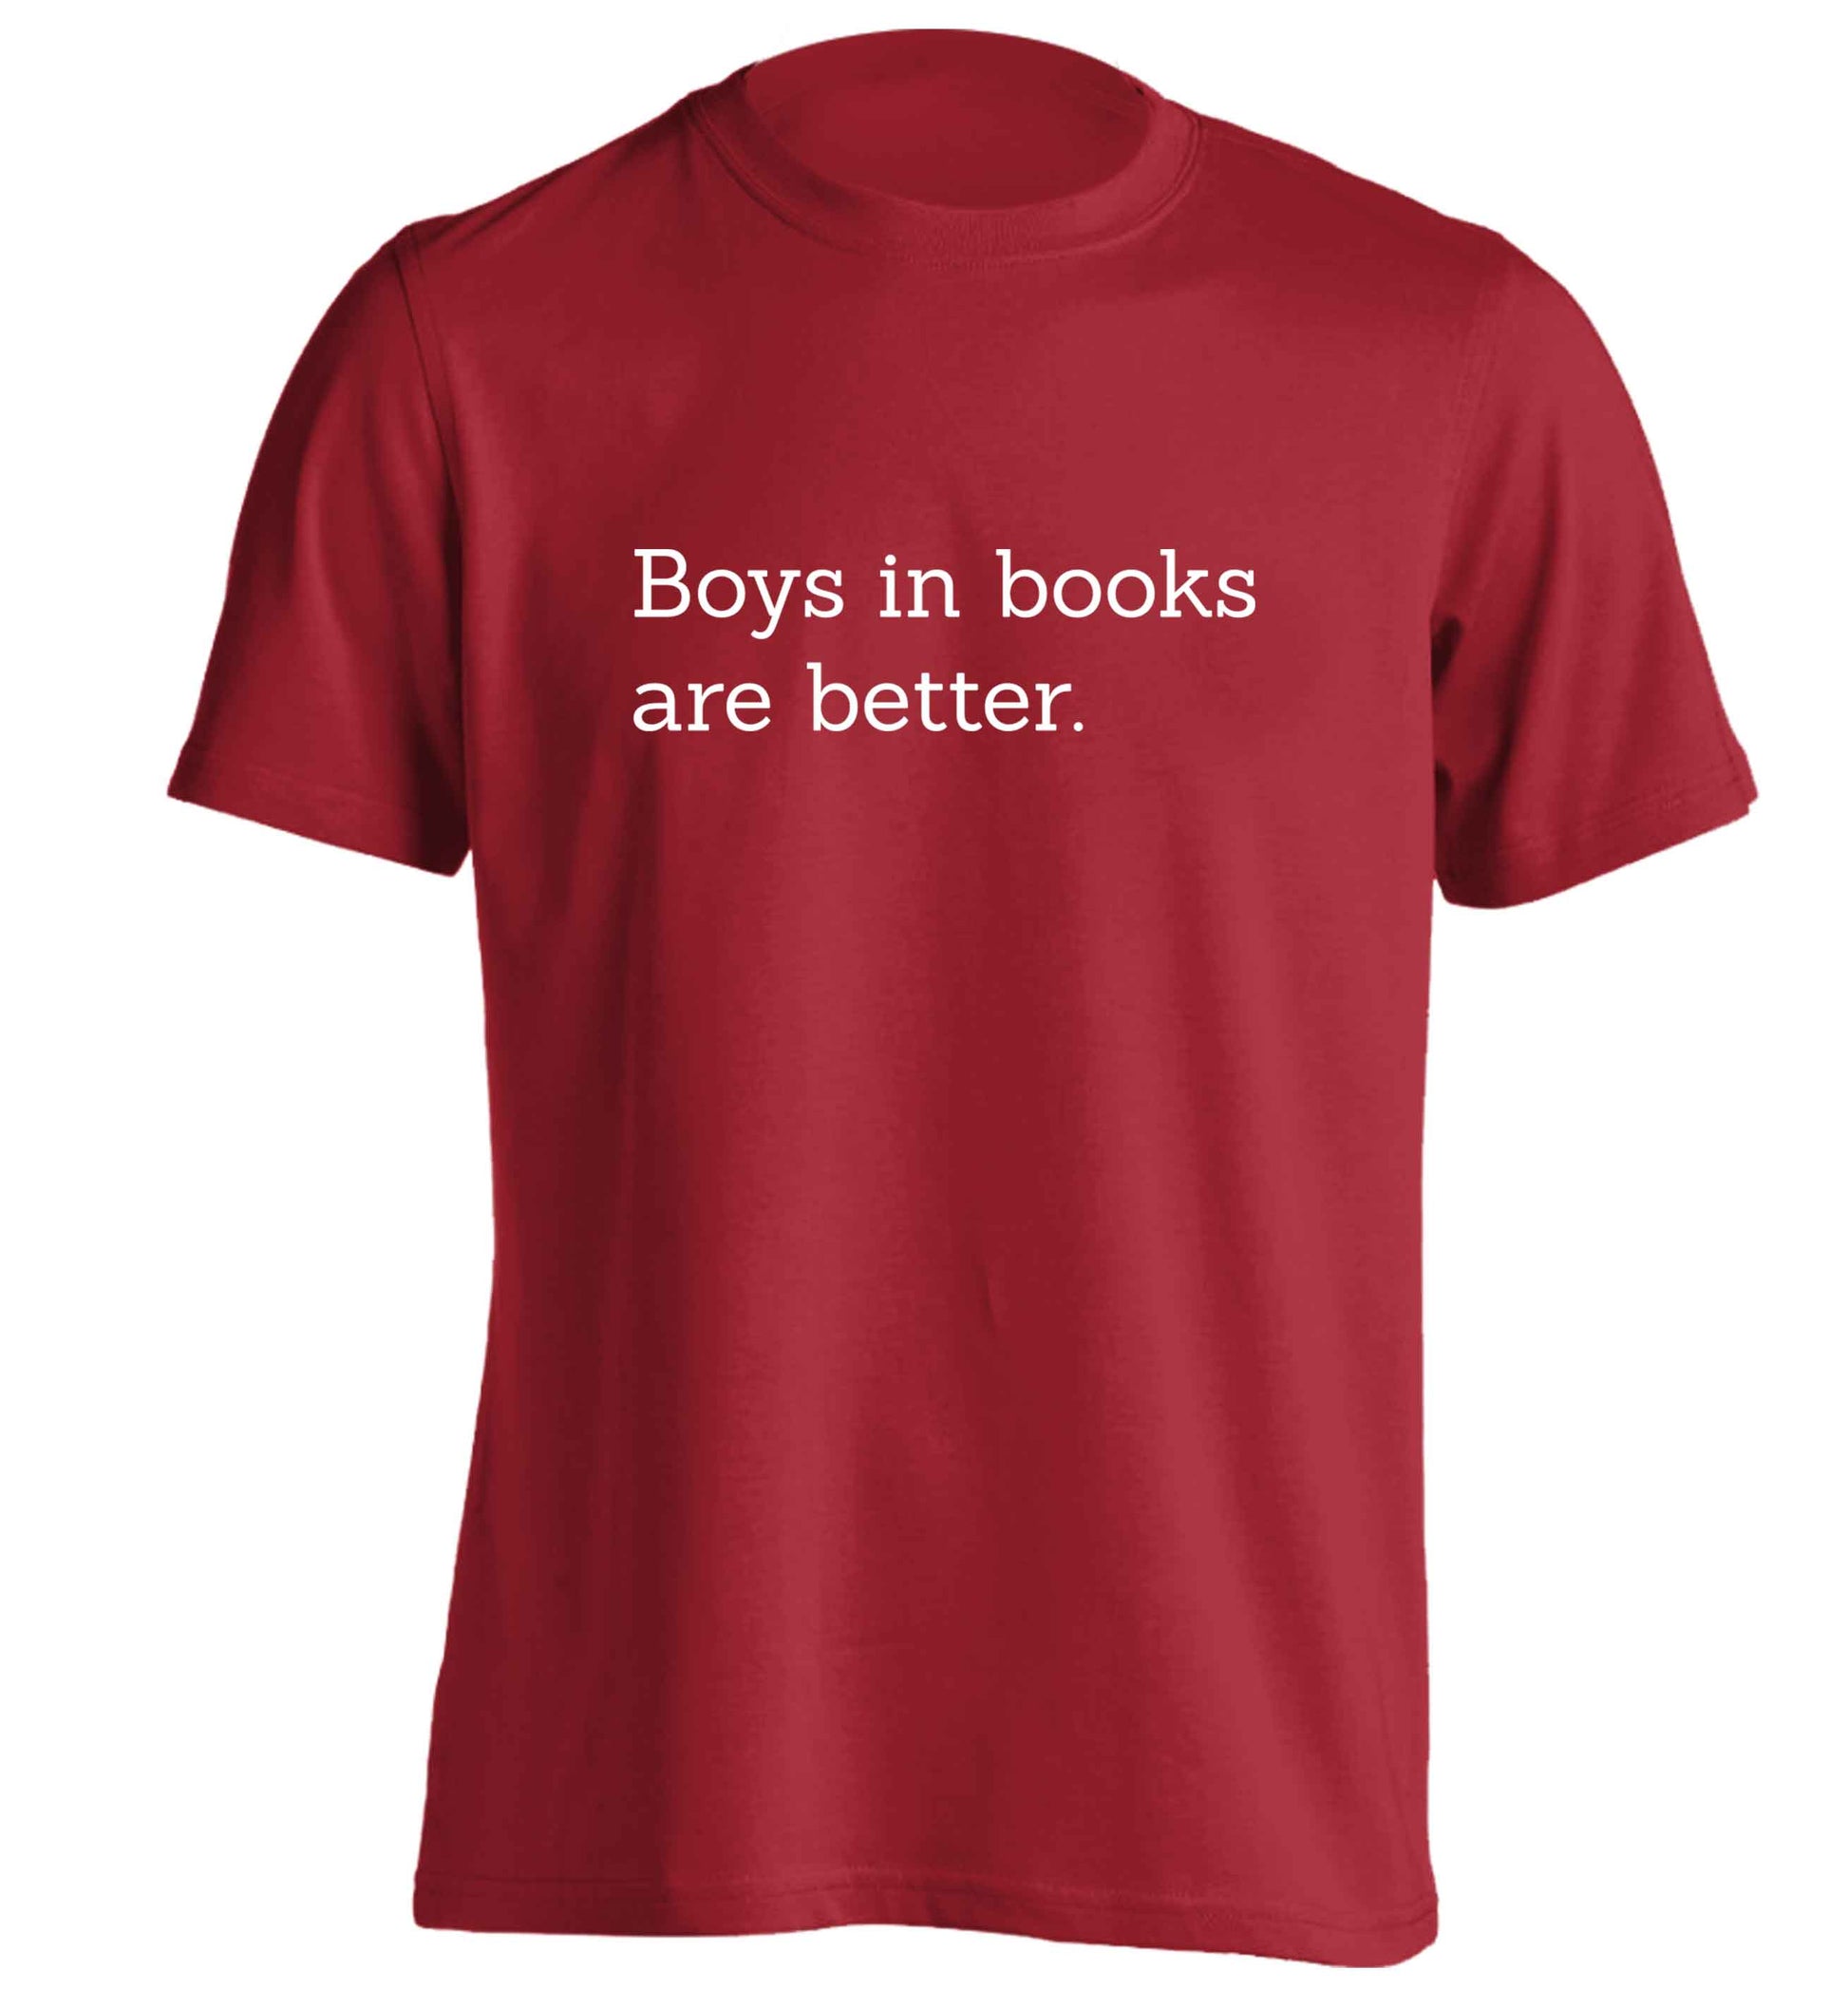 Boys in books are better adults unisex red Tshirt 2XL